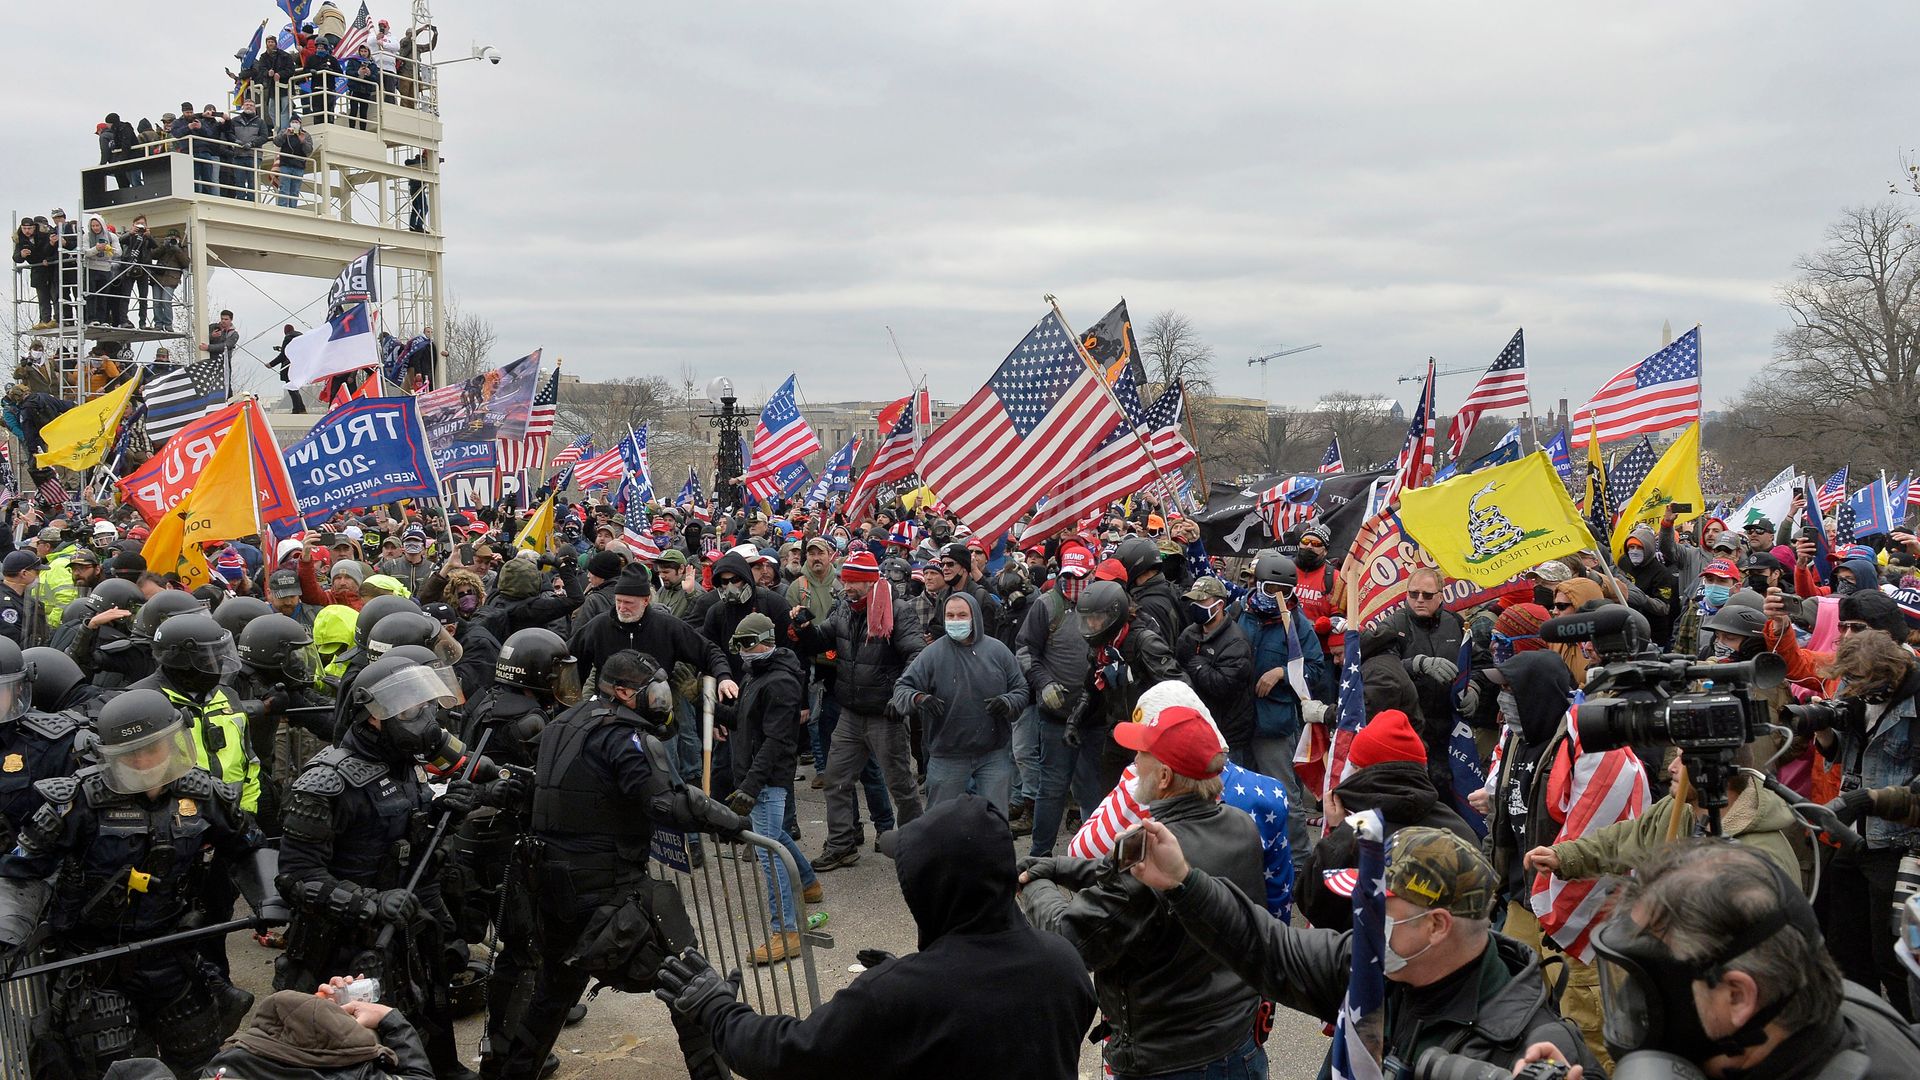 Trump supporters clash with police and security forces as they try to storm the US Capitol in Washington, DC on January 6